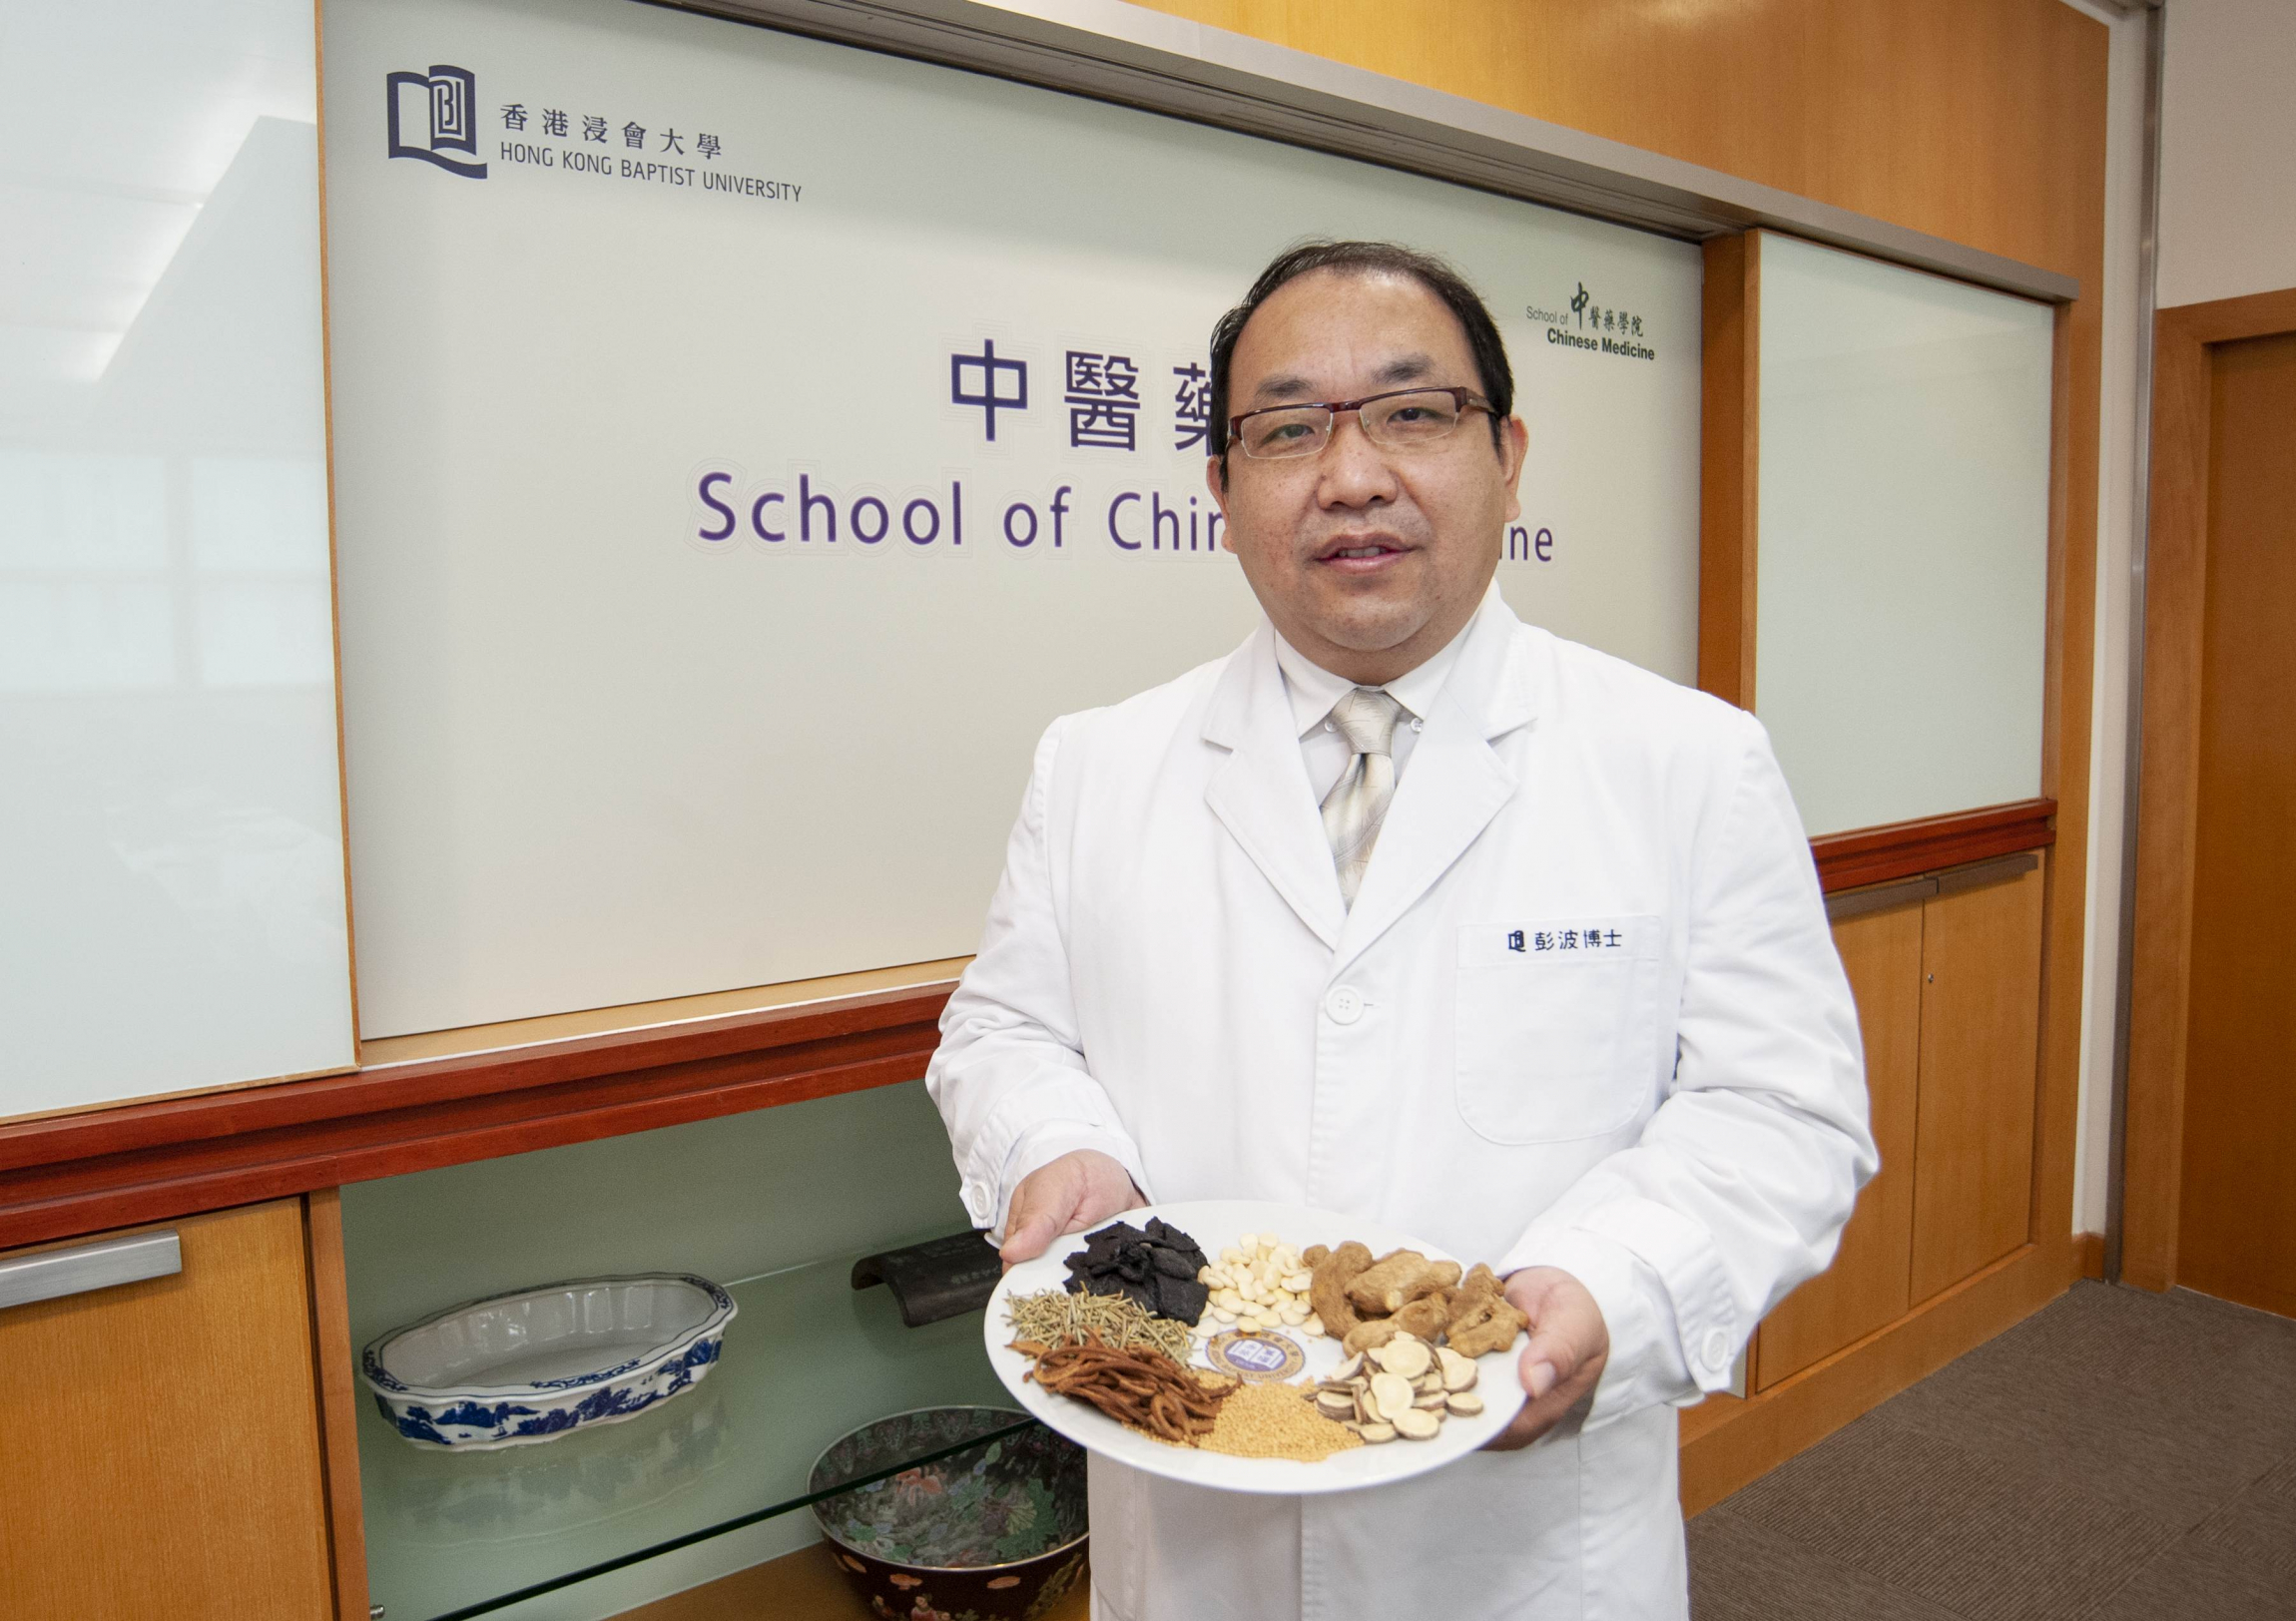 Dr Peng Bo, Assistant Professor of Practice in the Clinical Division of SCM at HKBU, said the Chinese medicine formula effectively eliminates and relieves symptoms for asthma patients.